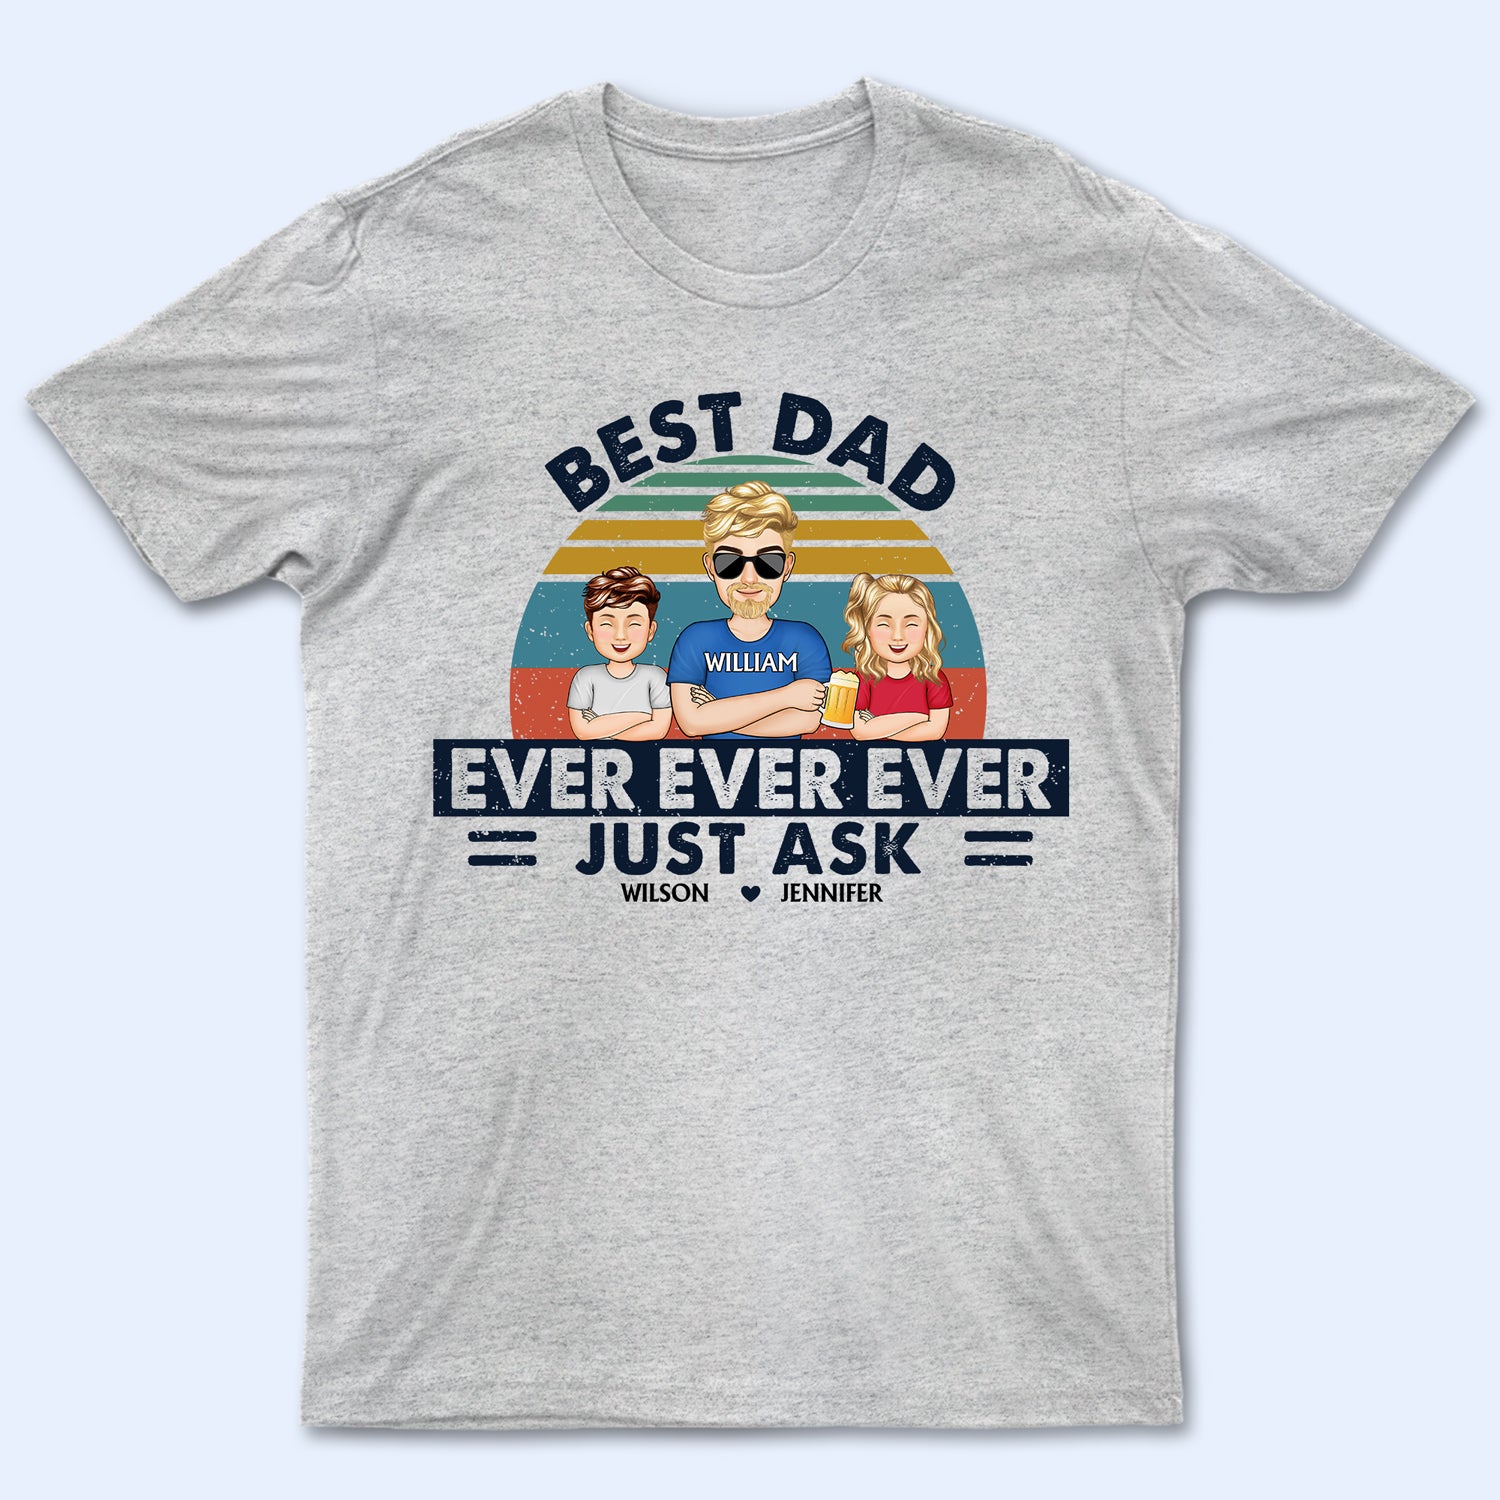 Best Dad Ever Ever Ever Just Ask - Birthday, Loving Gift For Dad, Father, Grandpa - Personalized Custom T Shirt